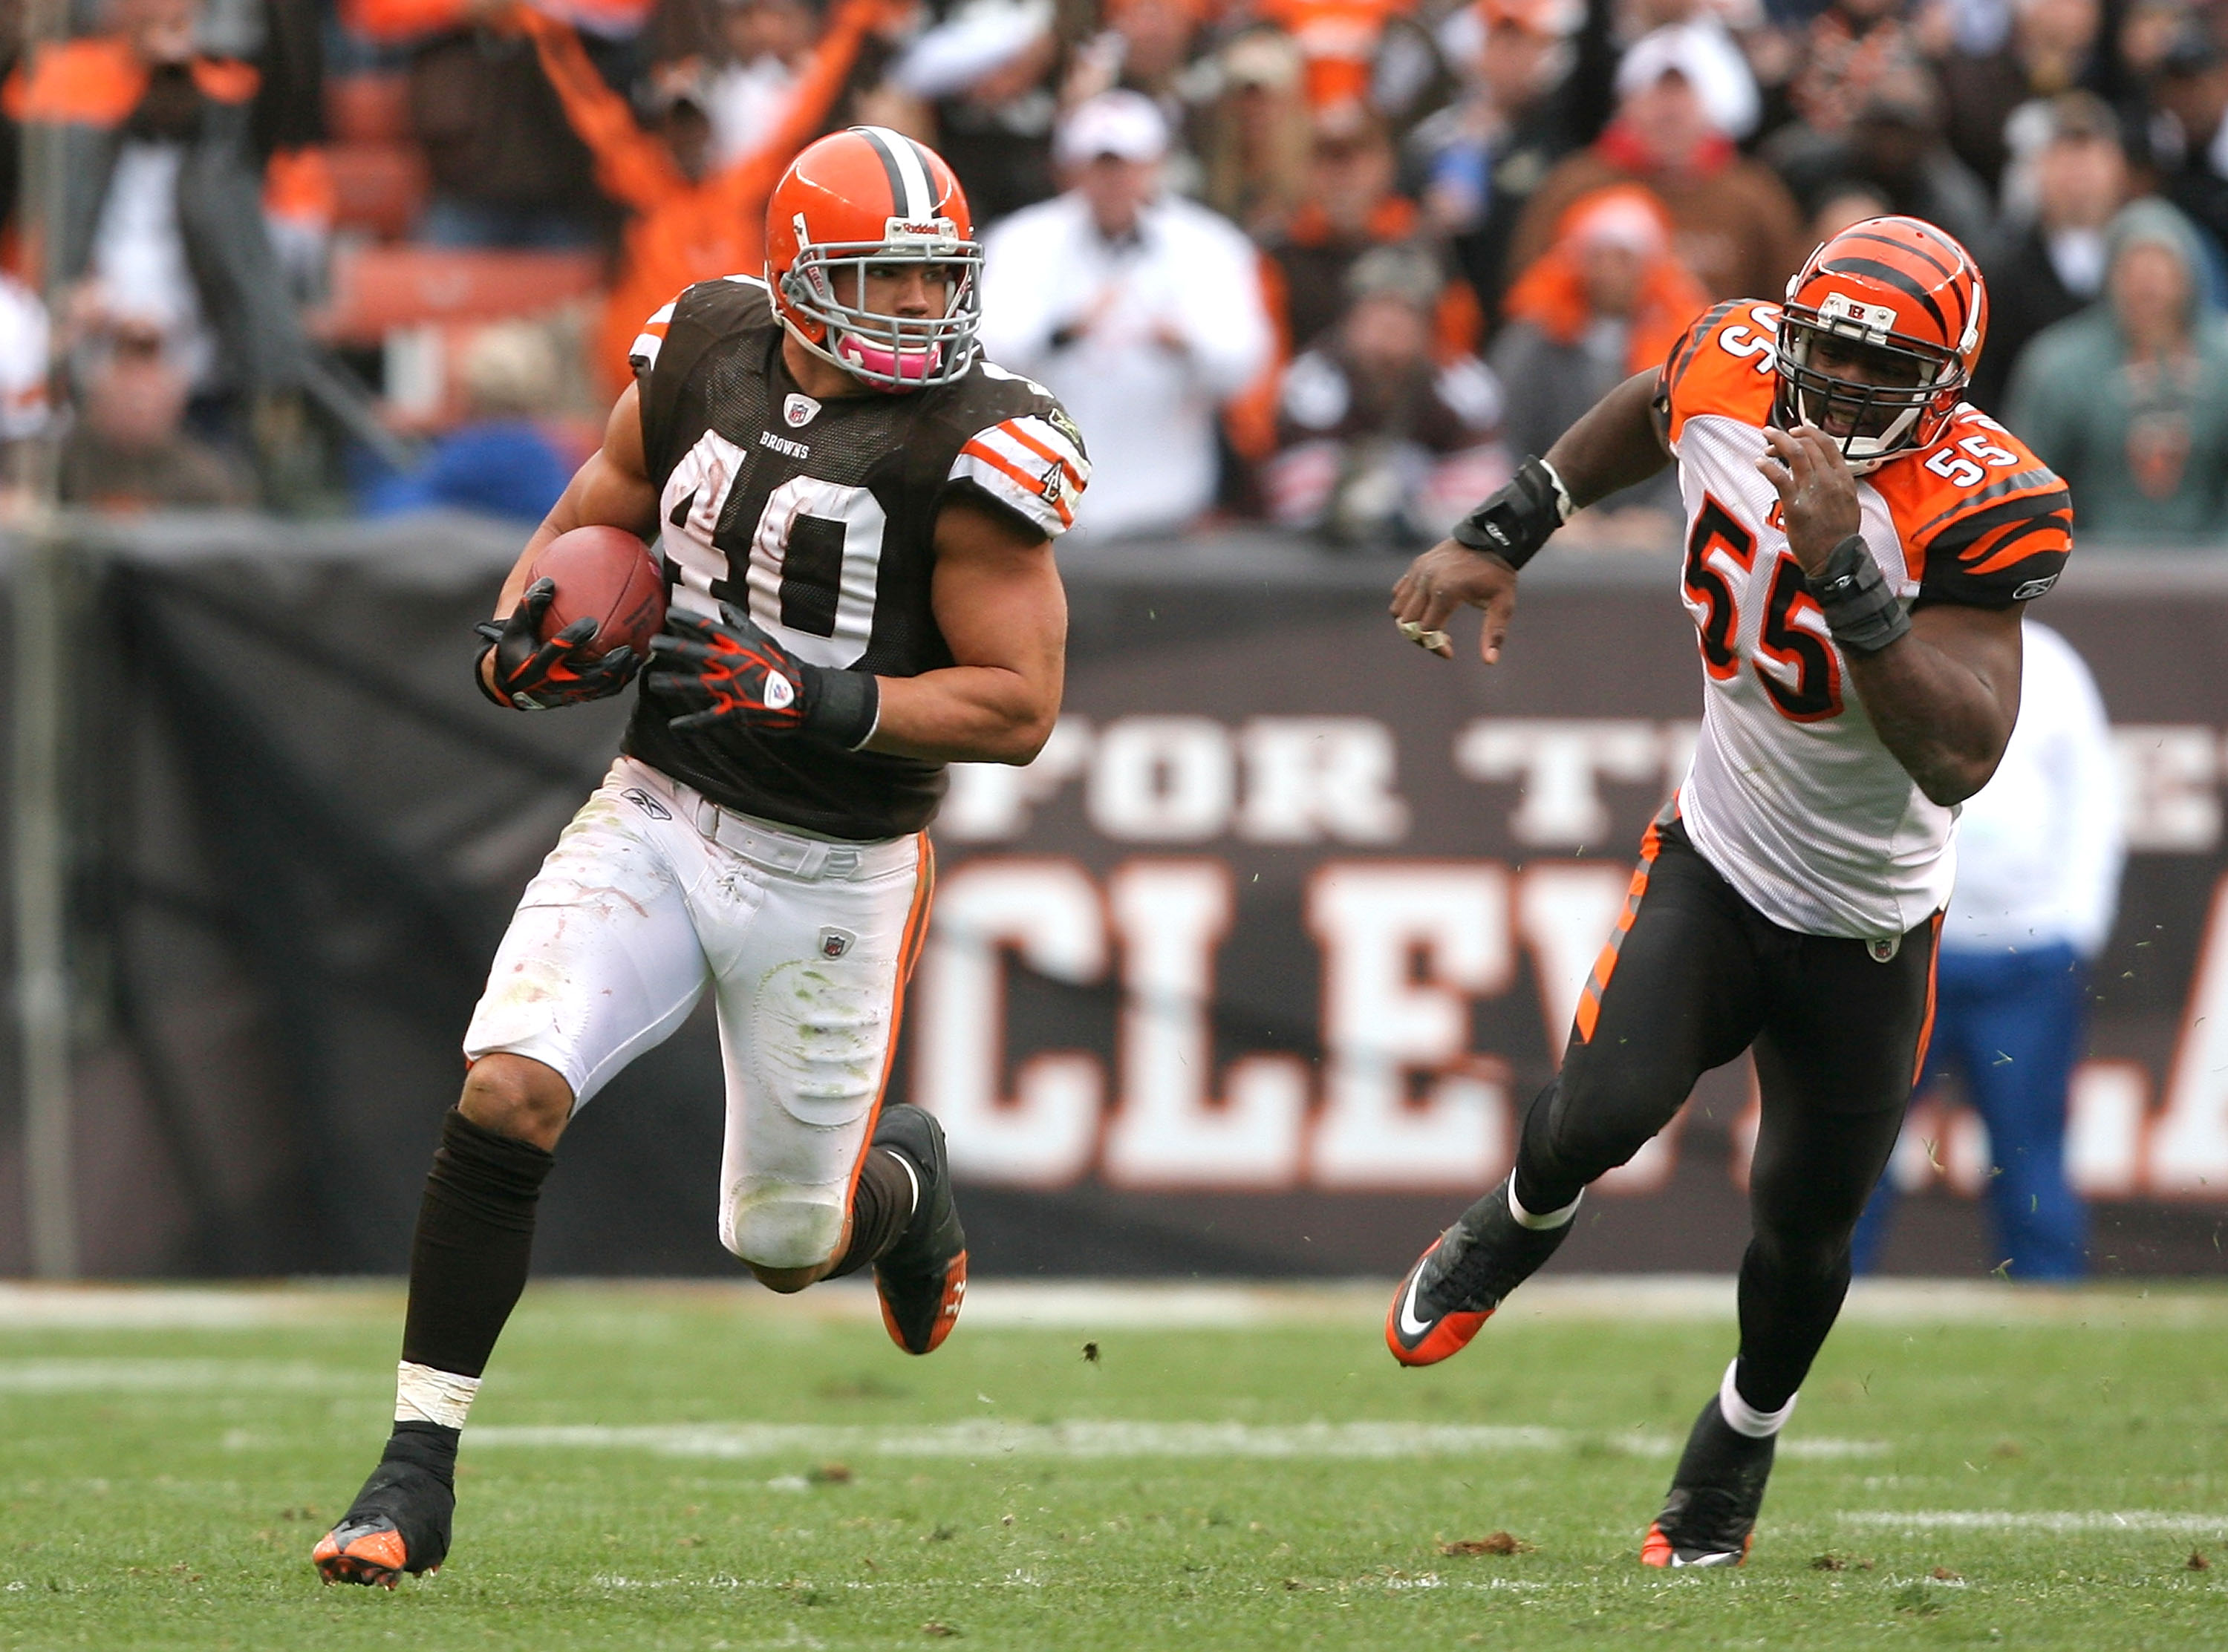 CLEVELAND - OCTOBER 03:  Running back Peyton Hillis #40 of the Cleveland Browns runs away from linebacker Keith Rivers #55 of the Cincinnati Bengals at Cleveland Browns Stadium on October 3, 2010 in Cleveland, Ohio.  (Photo by Matt Sullivan/Getty Images)